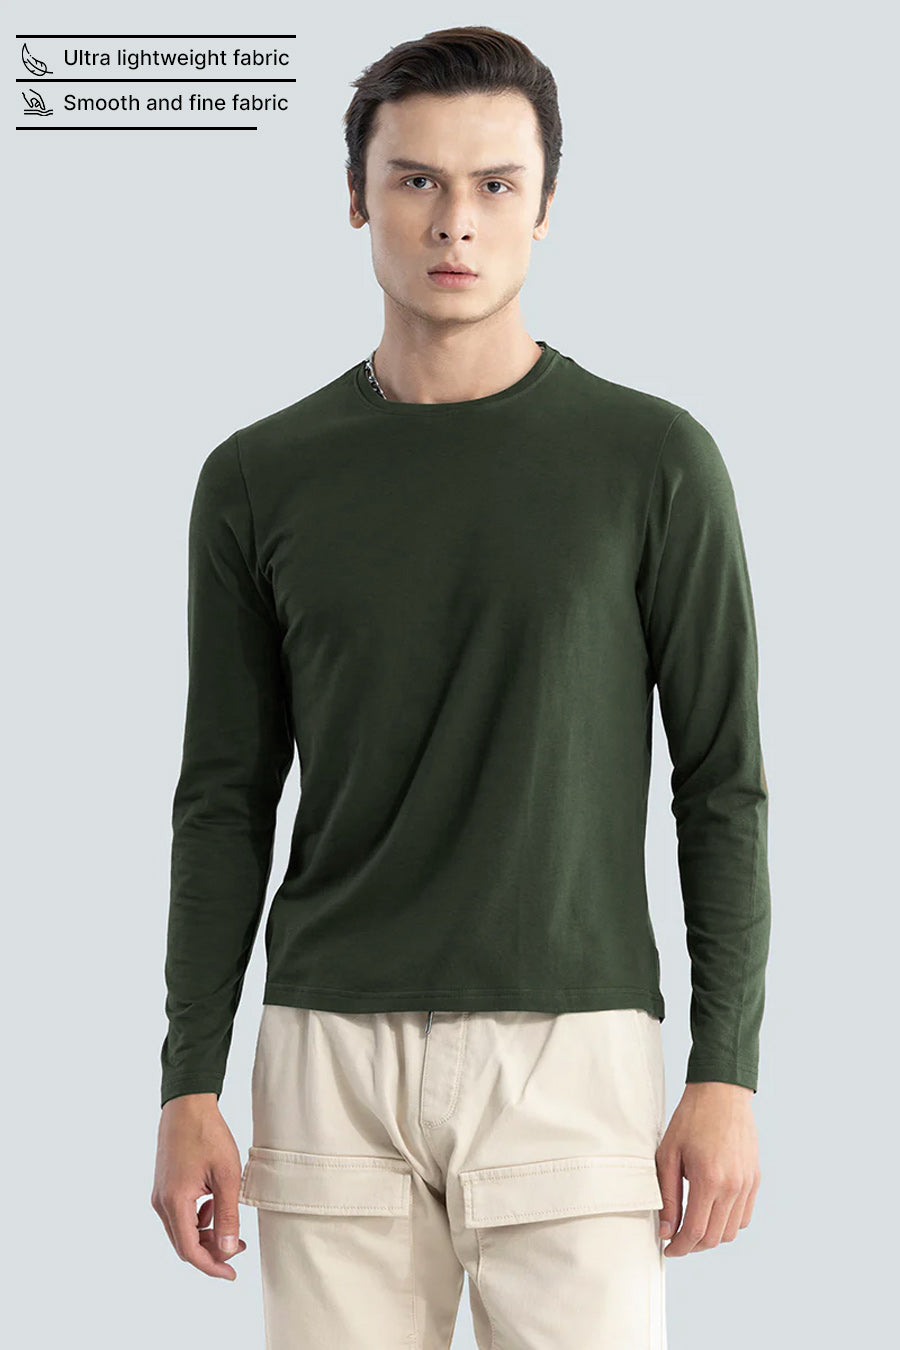 Classic Full sleeve in Army green